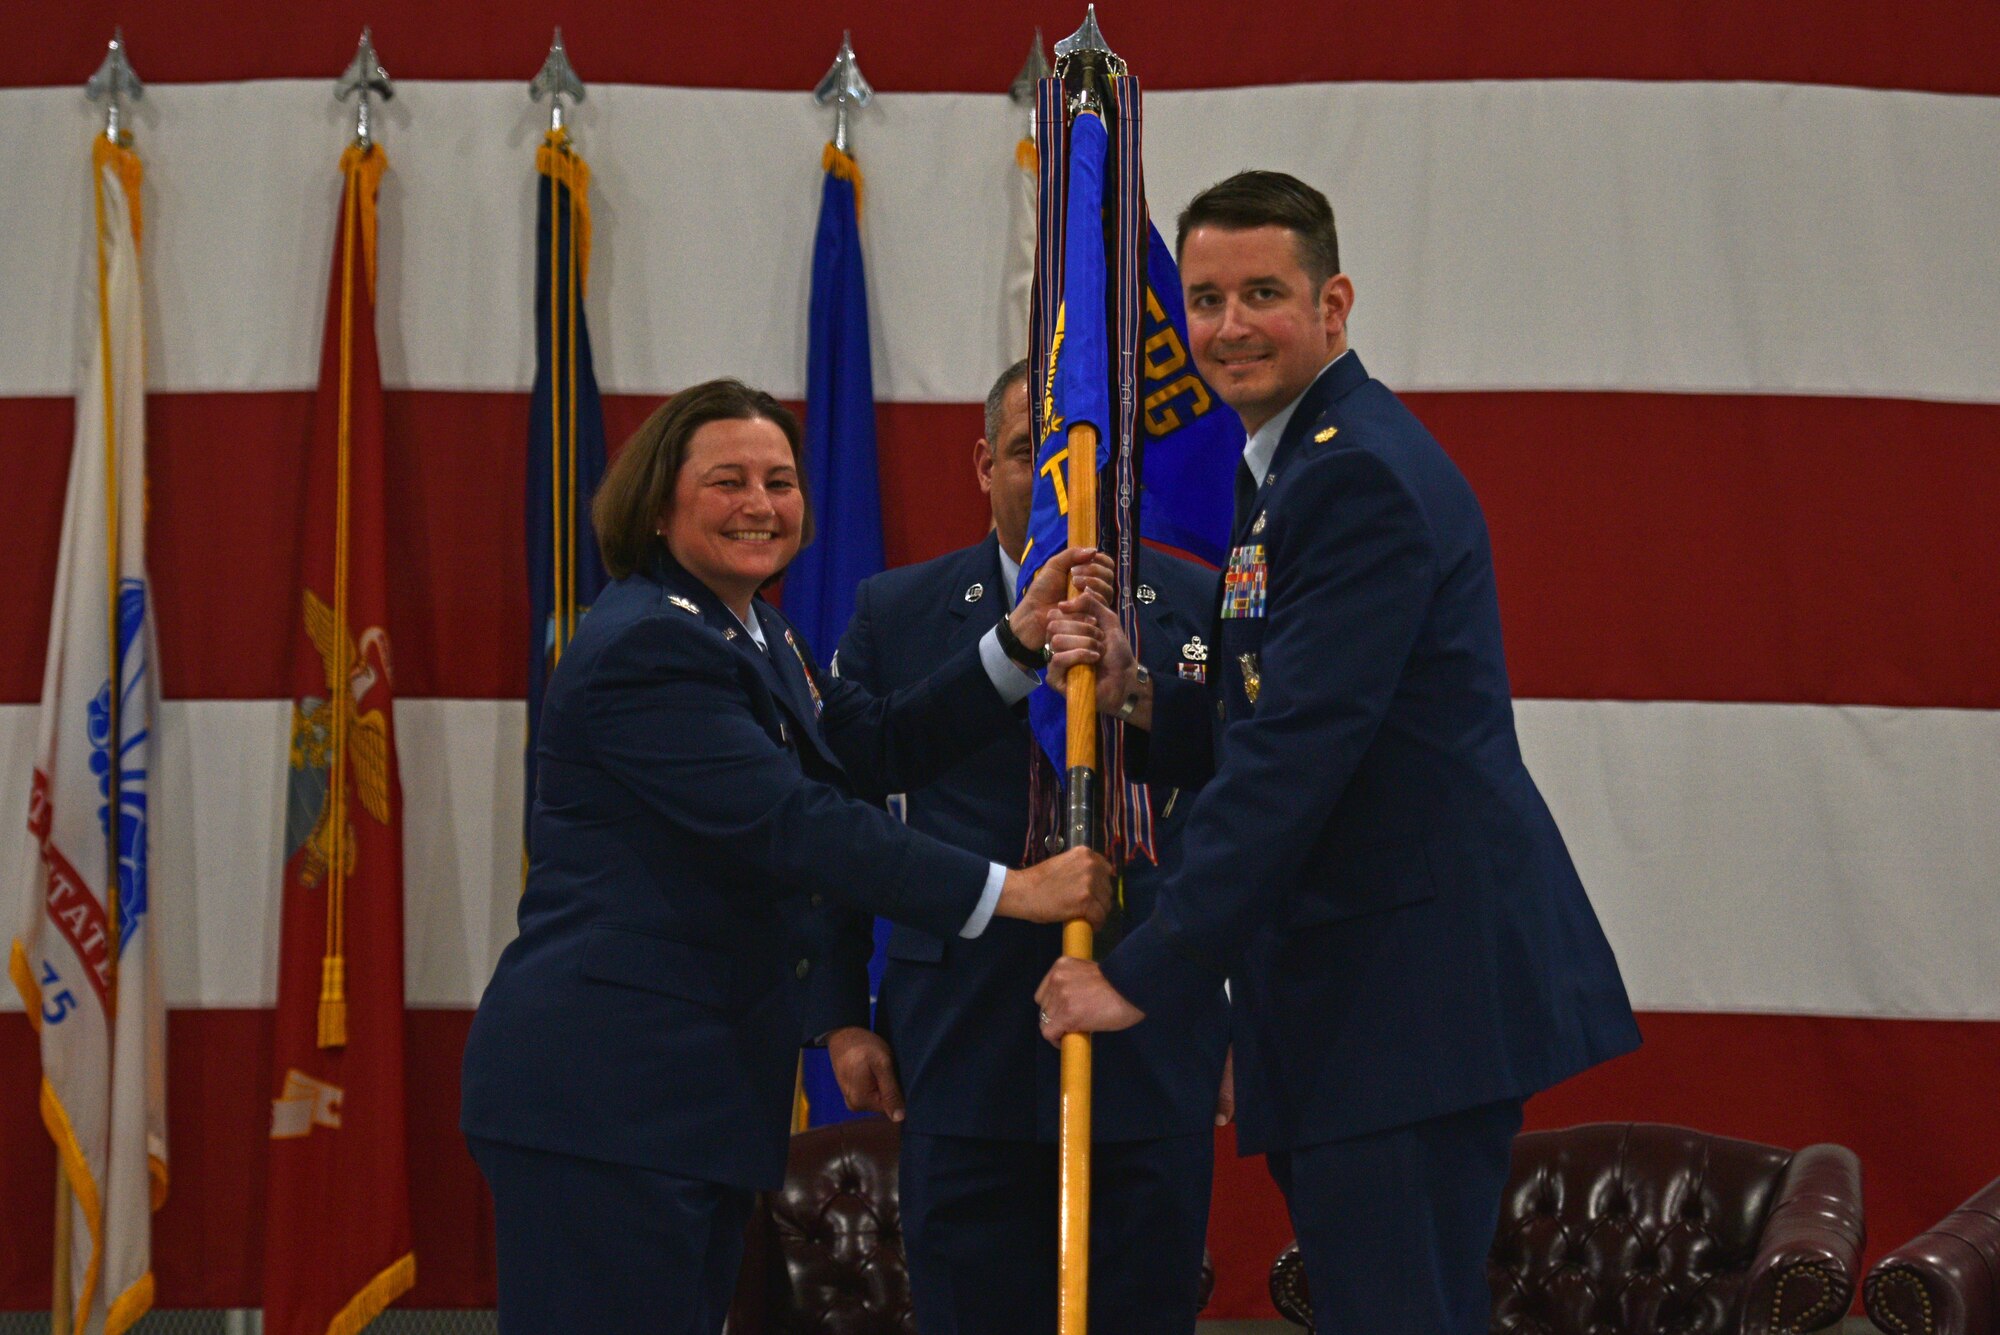 U.S. Air Force Col. Angelina Maguinness, 17th Training Group commander, passes the guidon to Maj. Samuel Logan, incoming 312th Training Squadron commander, during the change of command ceremony at the Louis F. Garland Department of Defense Fire Academy High Bay on Goodfellow Air Force Base, Texas, June 1, 2021. Logan was the flight commander for the 1st Special Operations Civil Engineer Squadron at Hurlburt Field, Florida. (U.S. Air Force photo by Senior Airman Ashley Thrash)